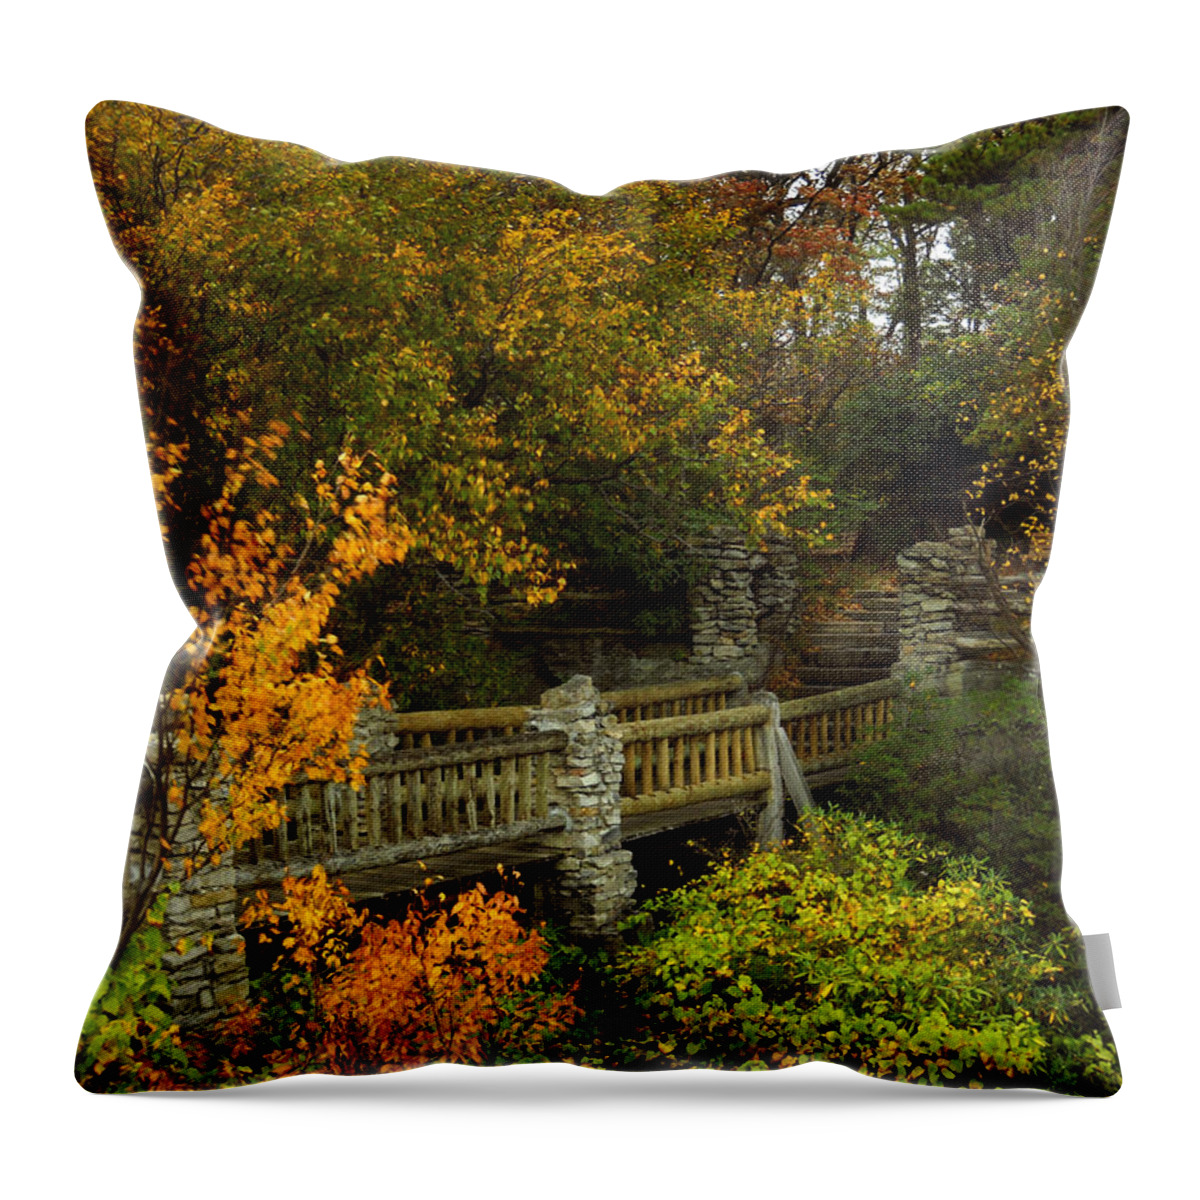 Appalachia Throw Pillow featuring the photograph Windy Day at Cooper's Rock by Amanda Jones